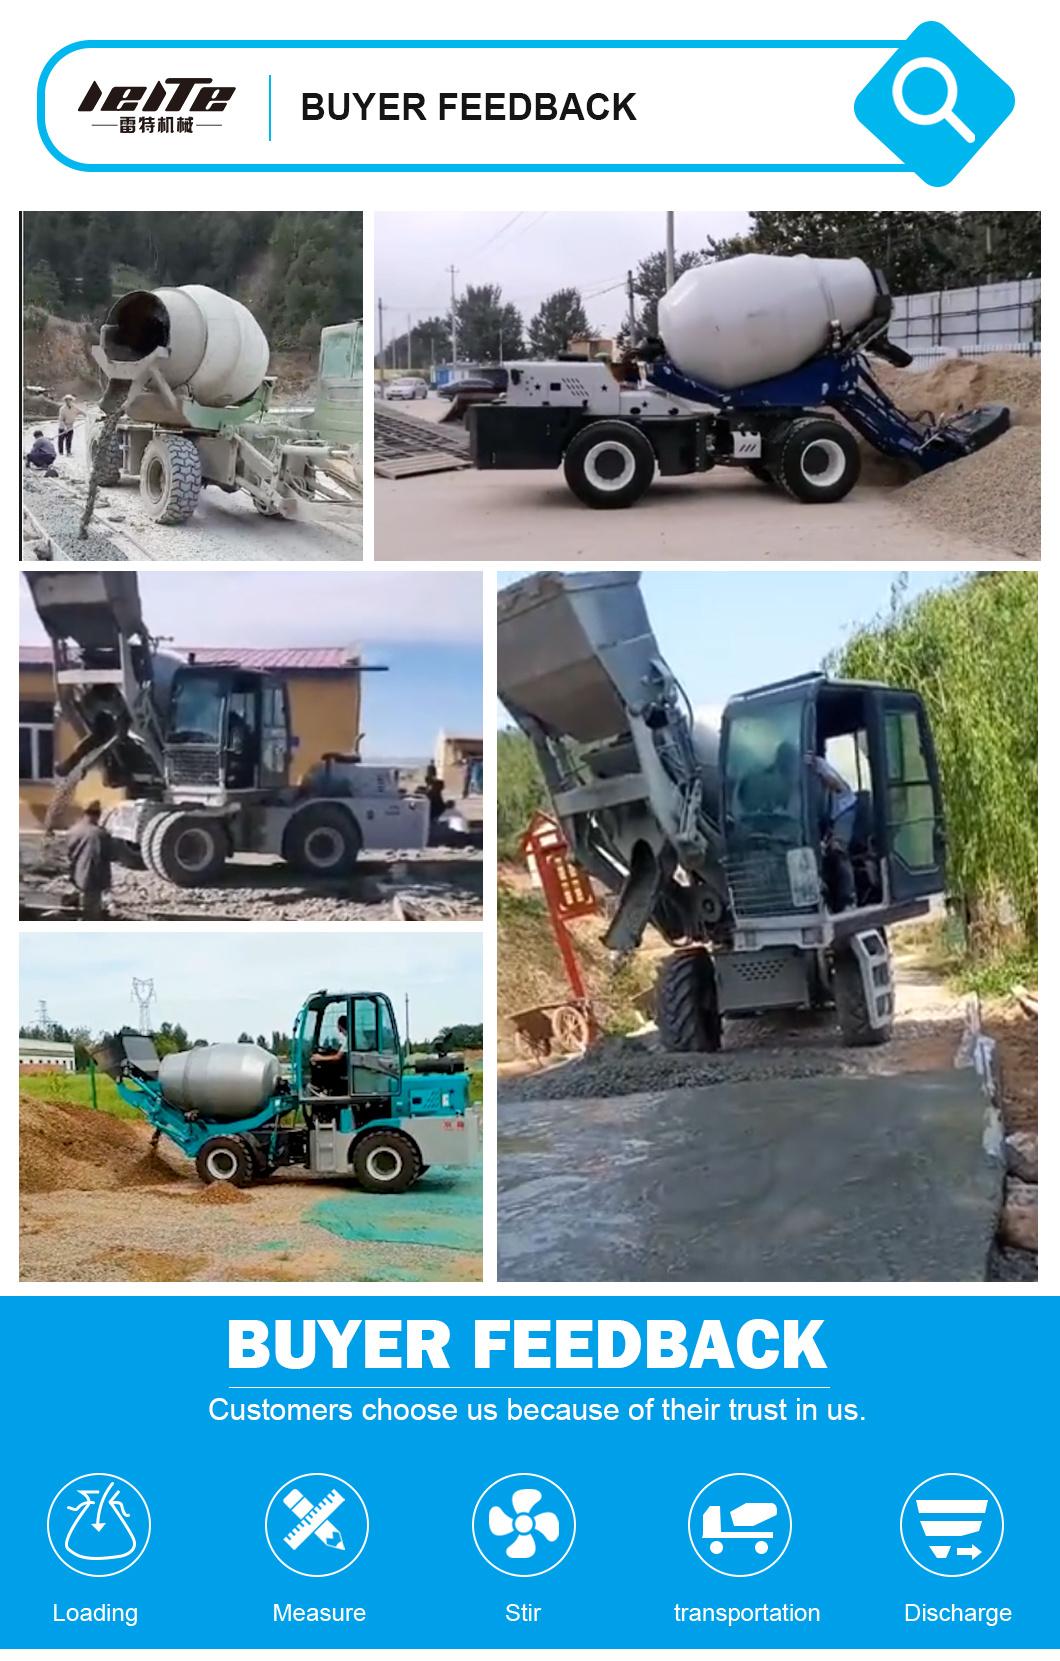 Cheap Mobile Self Loading Concrete Transit Mixer Truck for Road Bridge Tunnel Highway and Hydro Construction